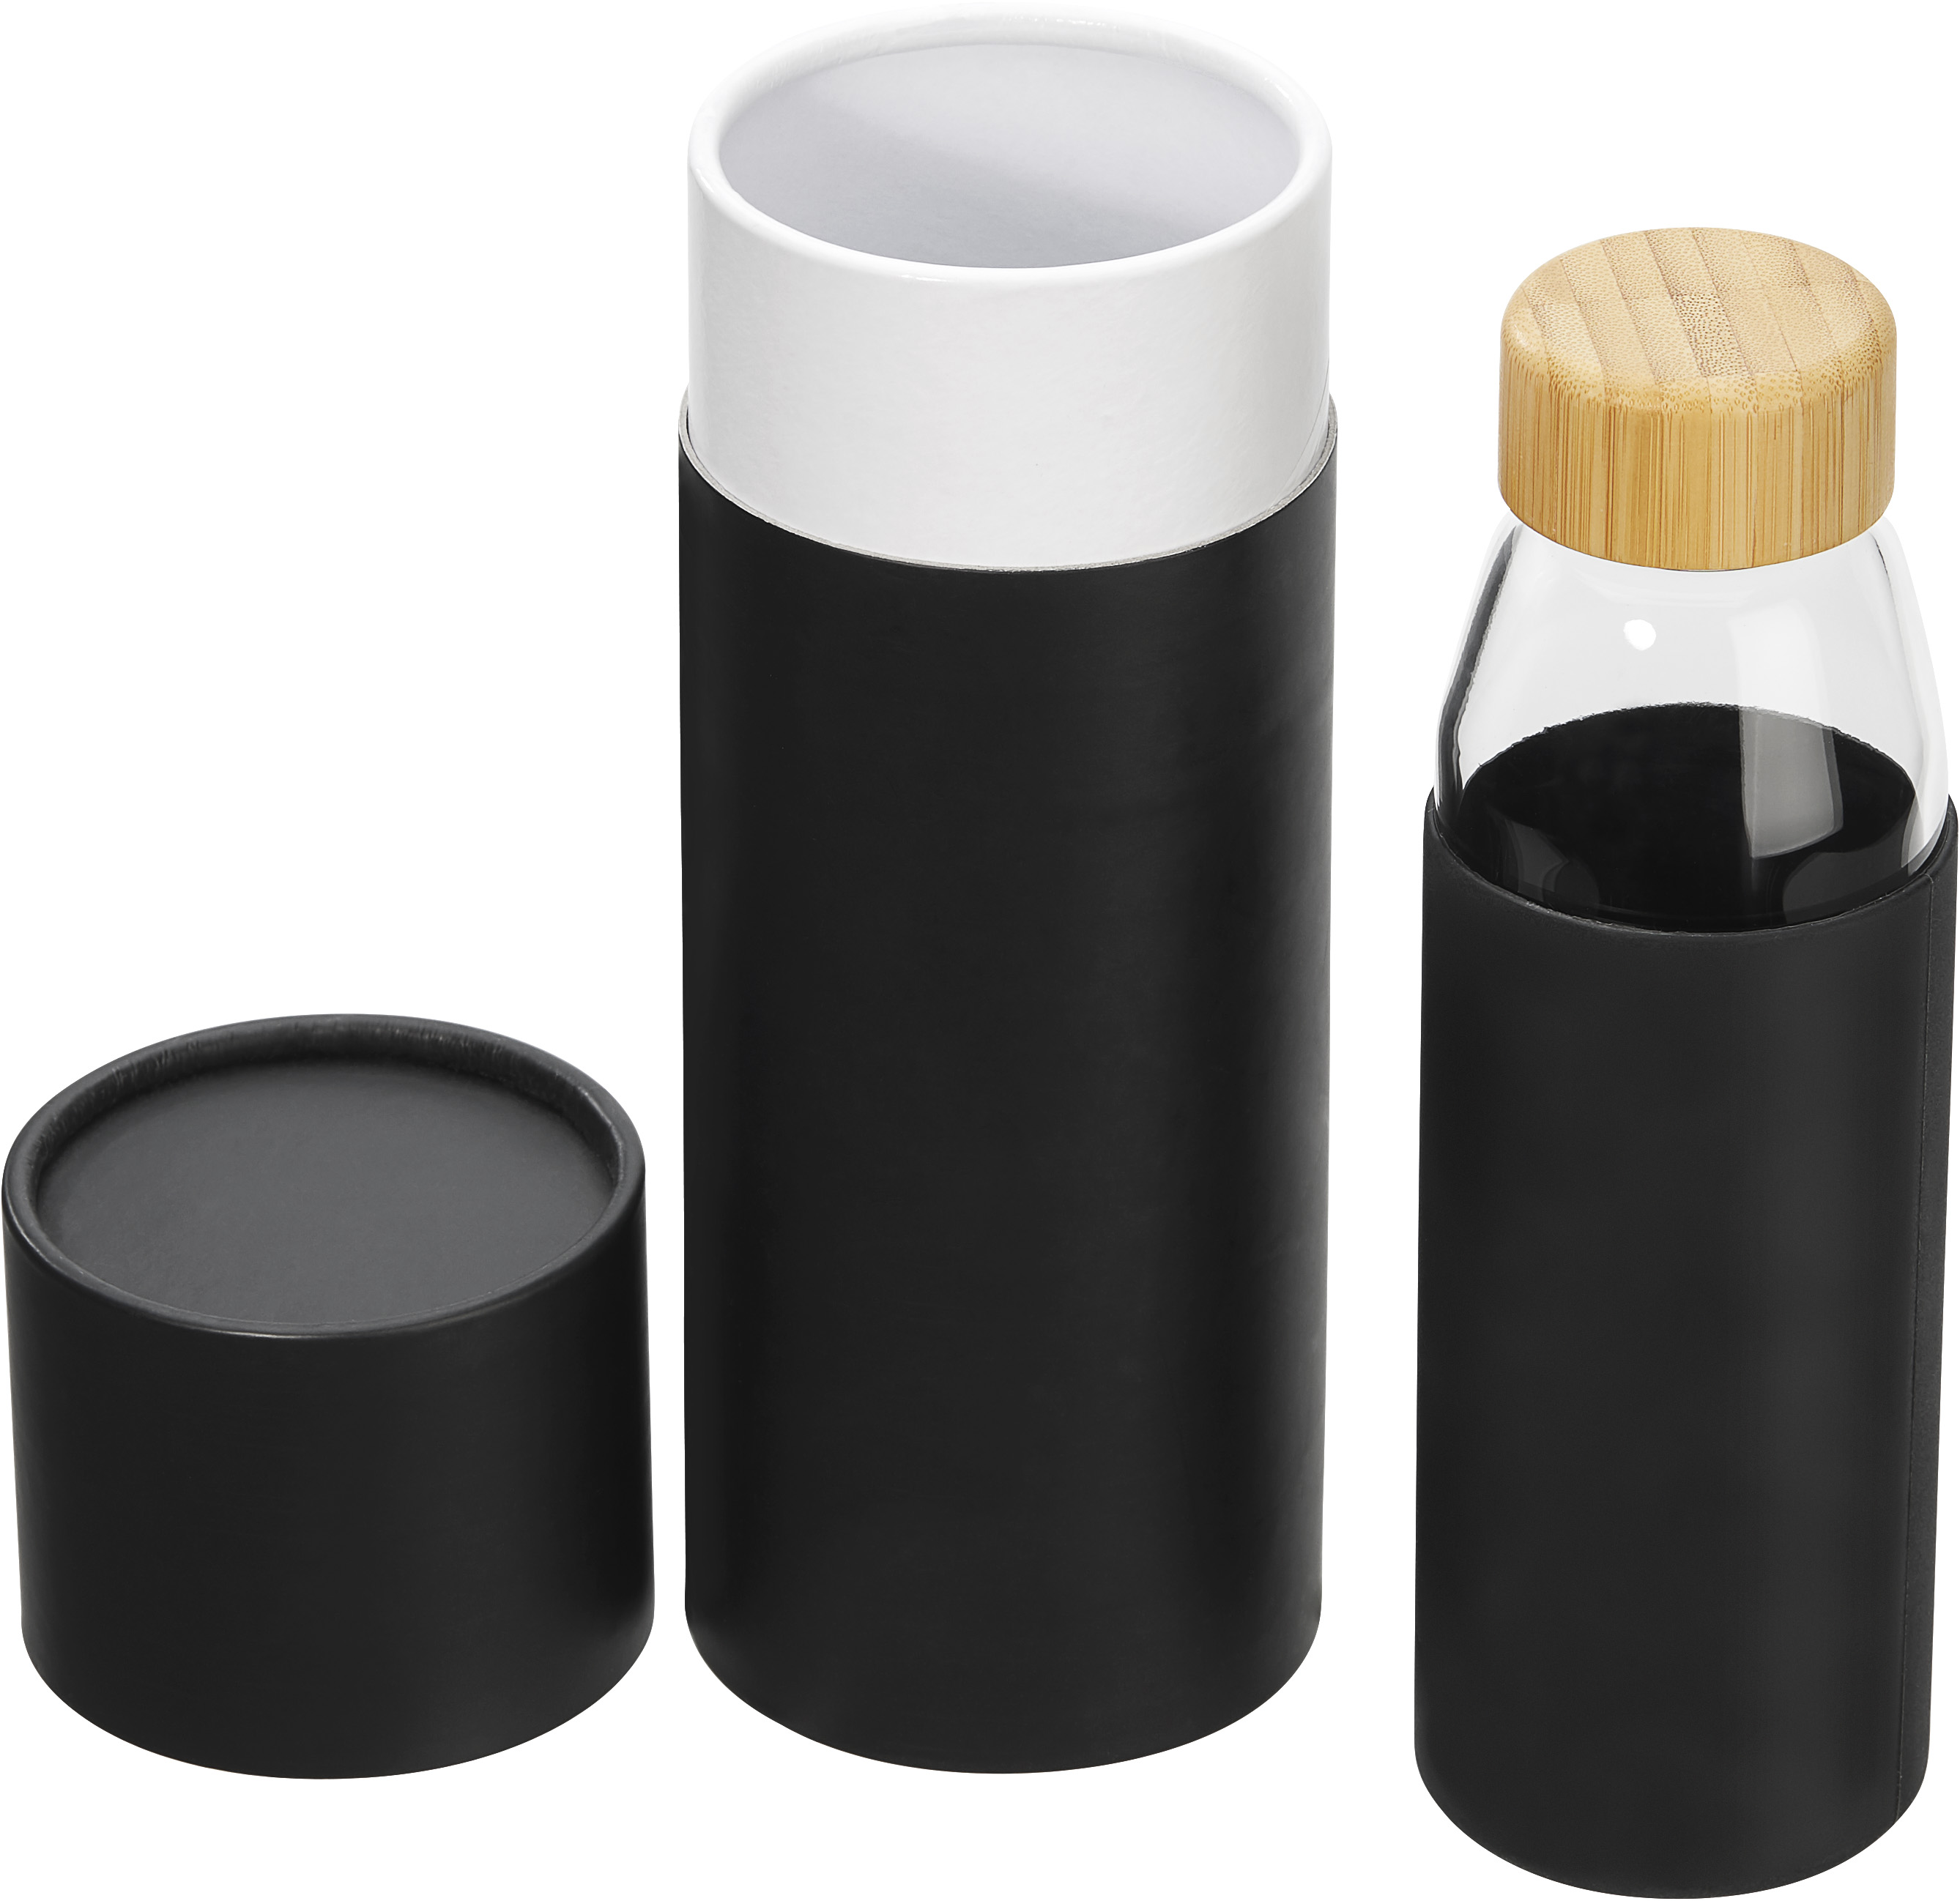 Eco-Friendly Bottle ECO B1 with silicone sleeve and Bamboo cover